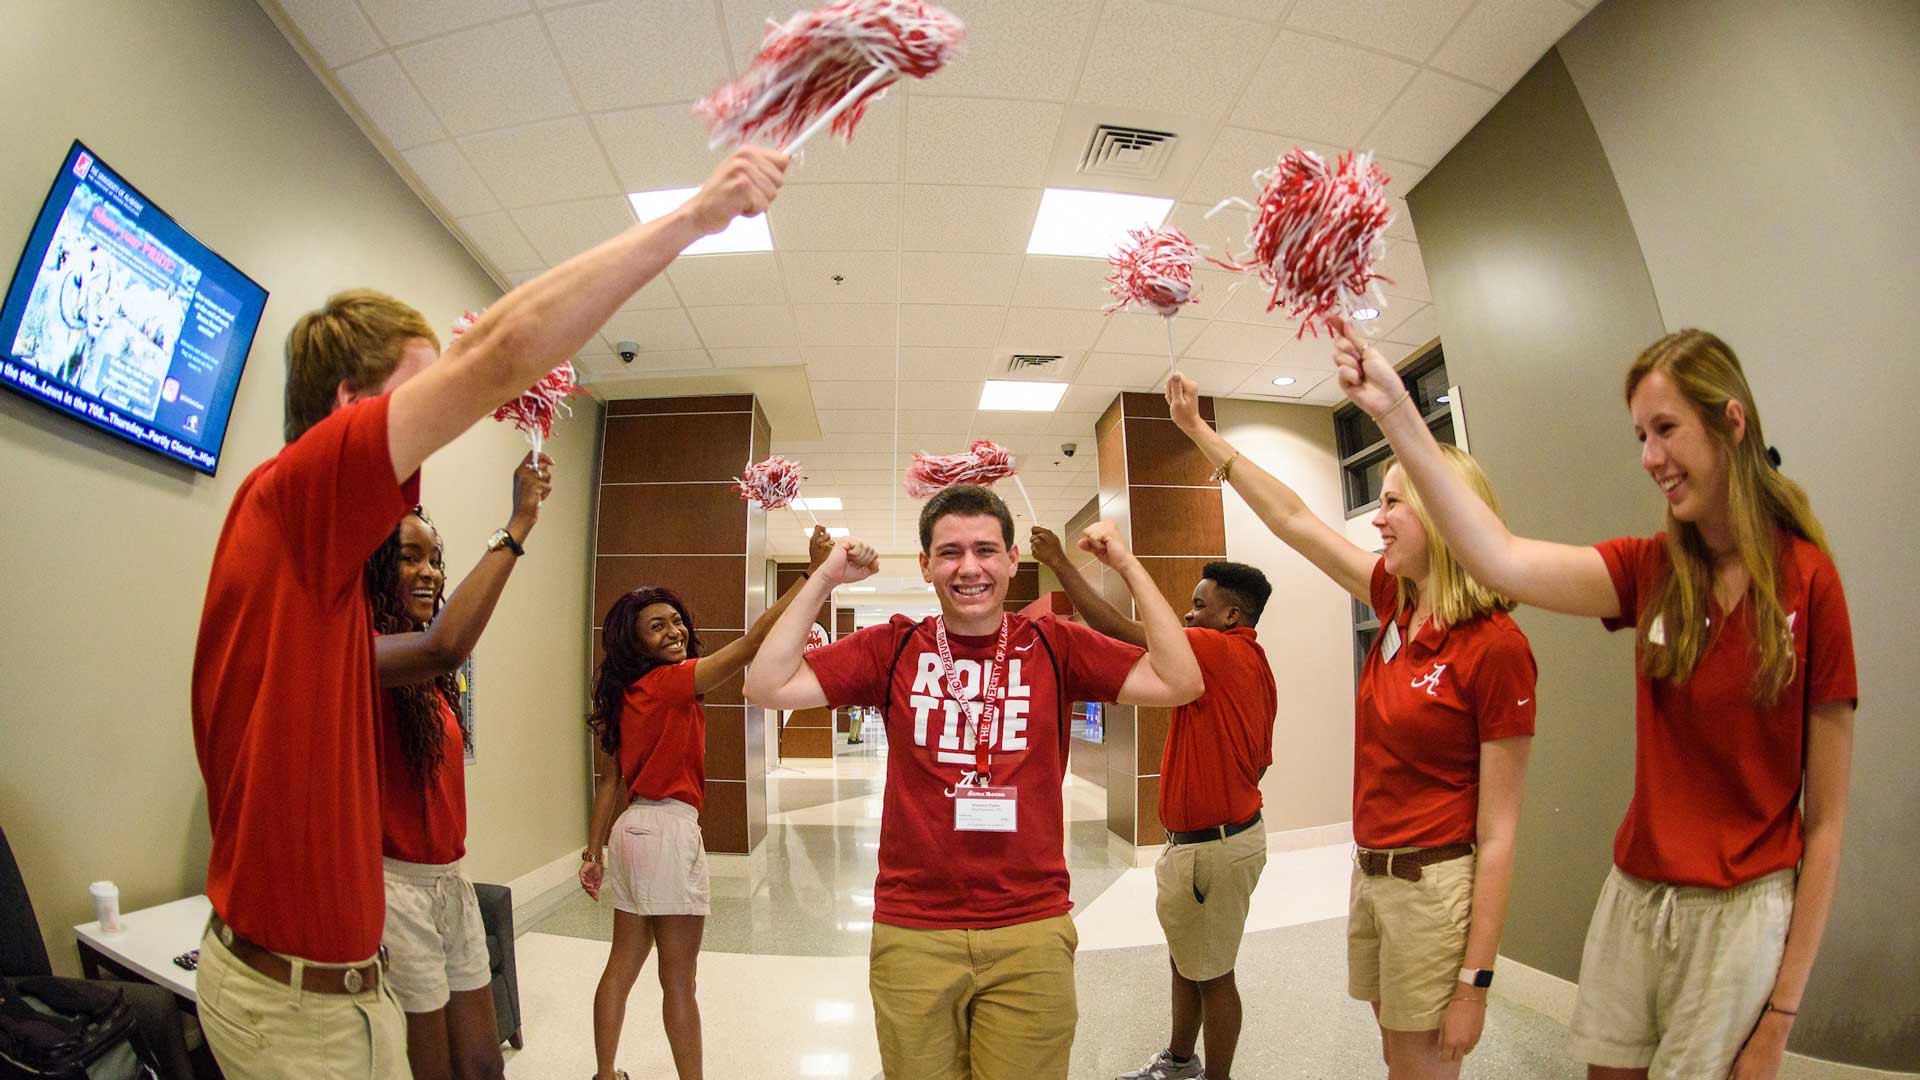 a line of avantis waving pom poms cheer while greeting a male bama bound attendee who smiles holding his fists in the air